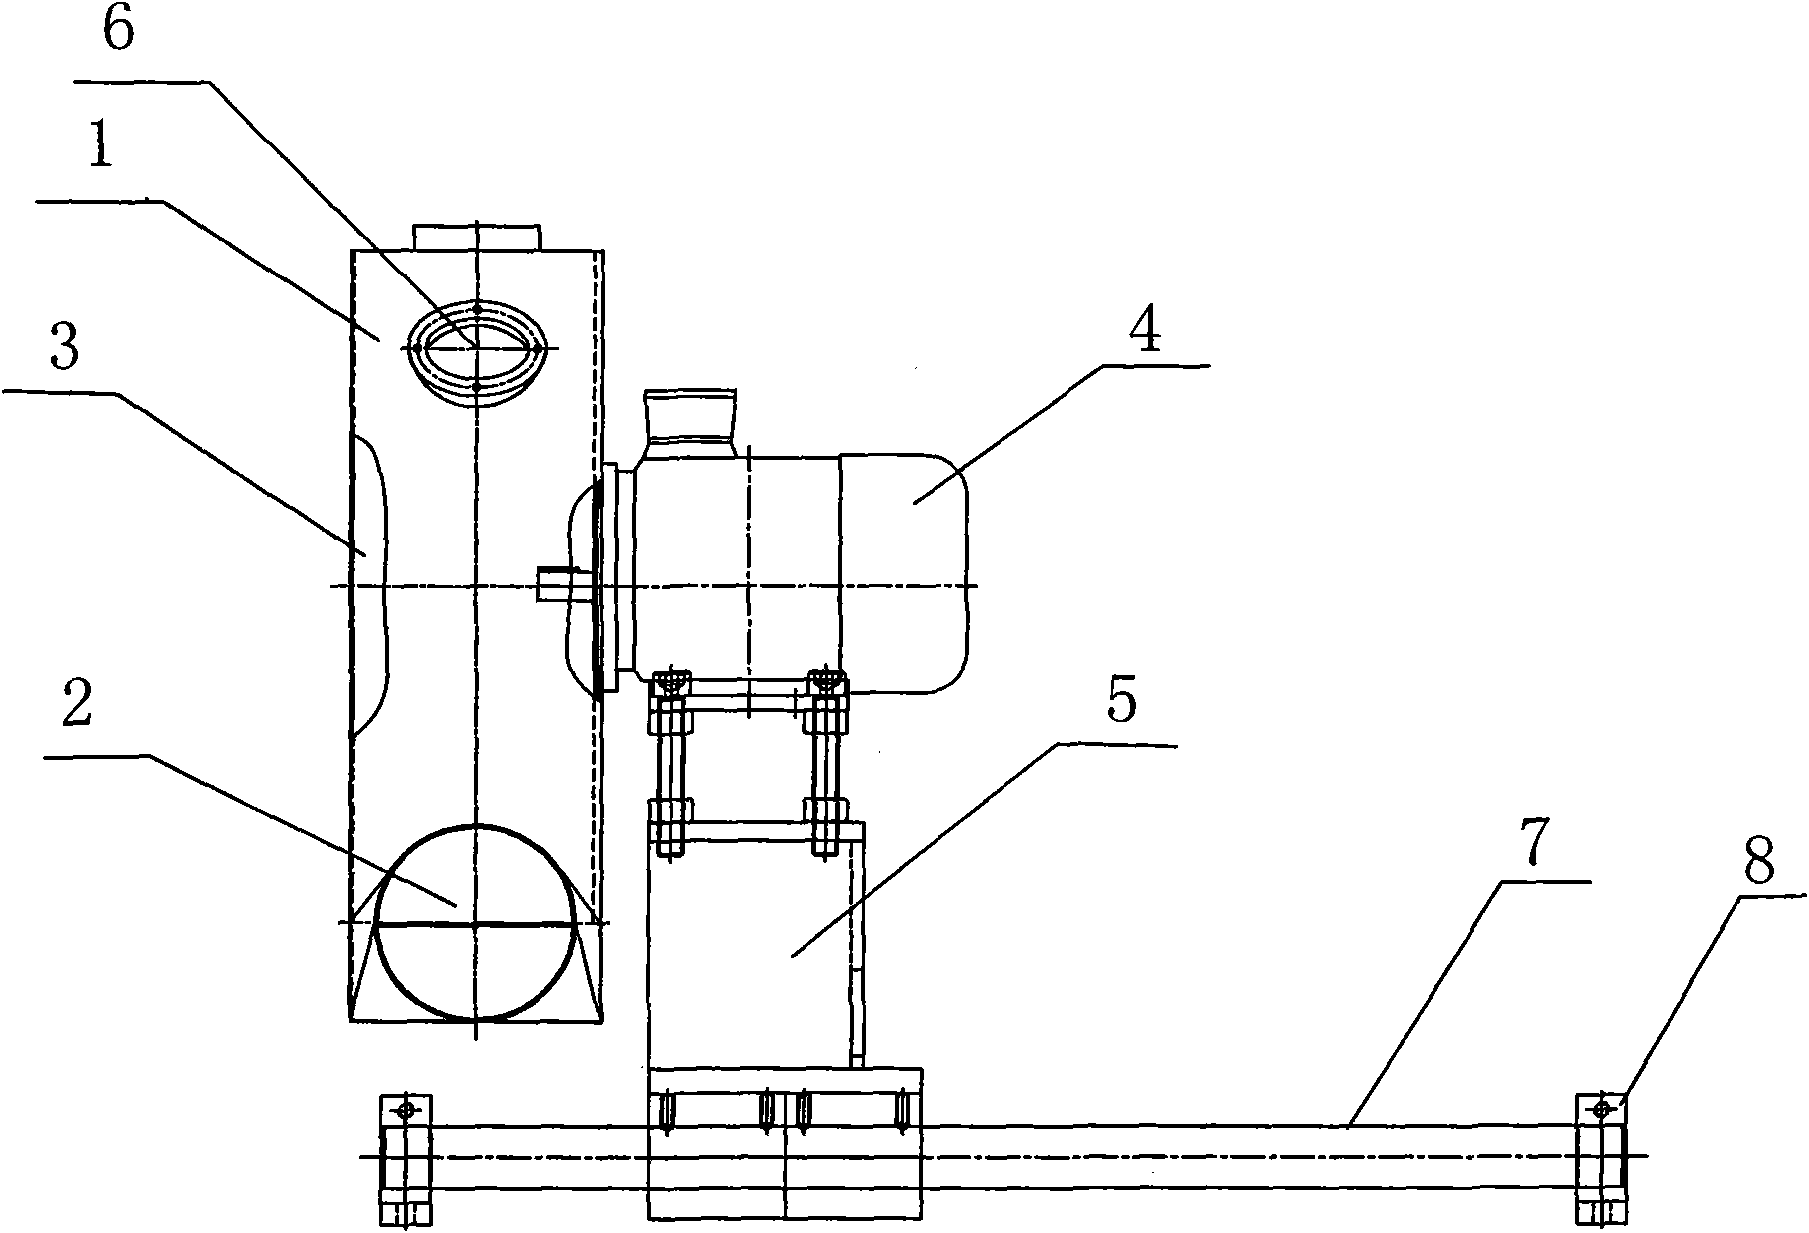 Grain dicing cover device with slide rail